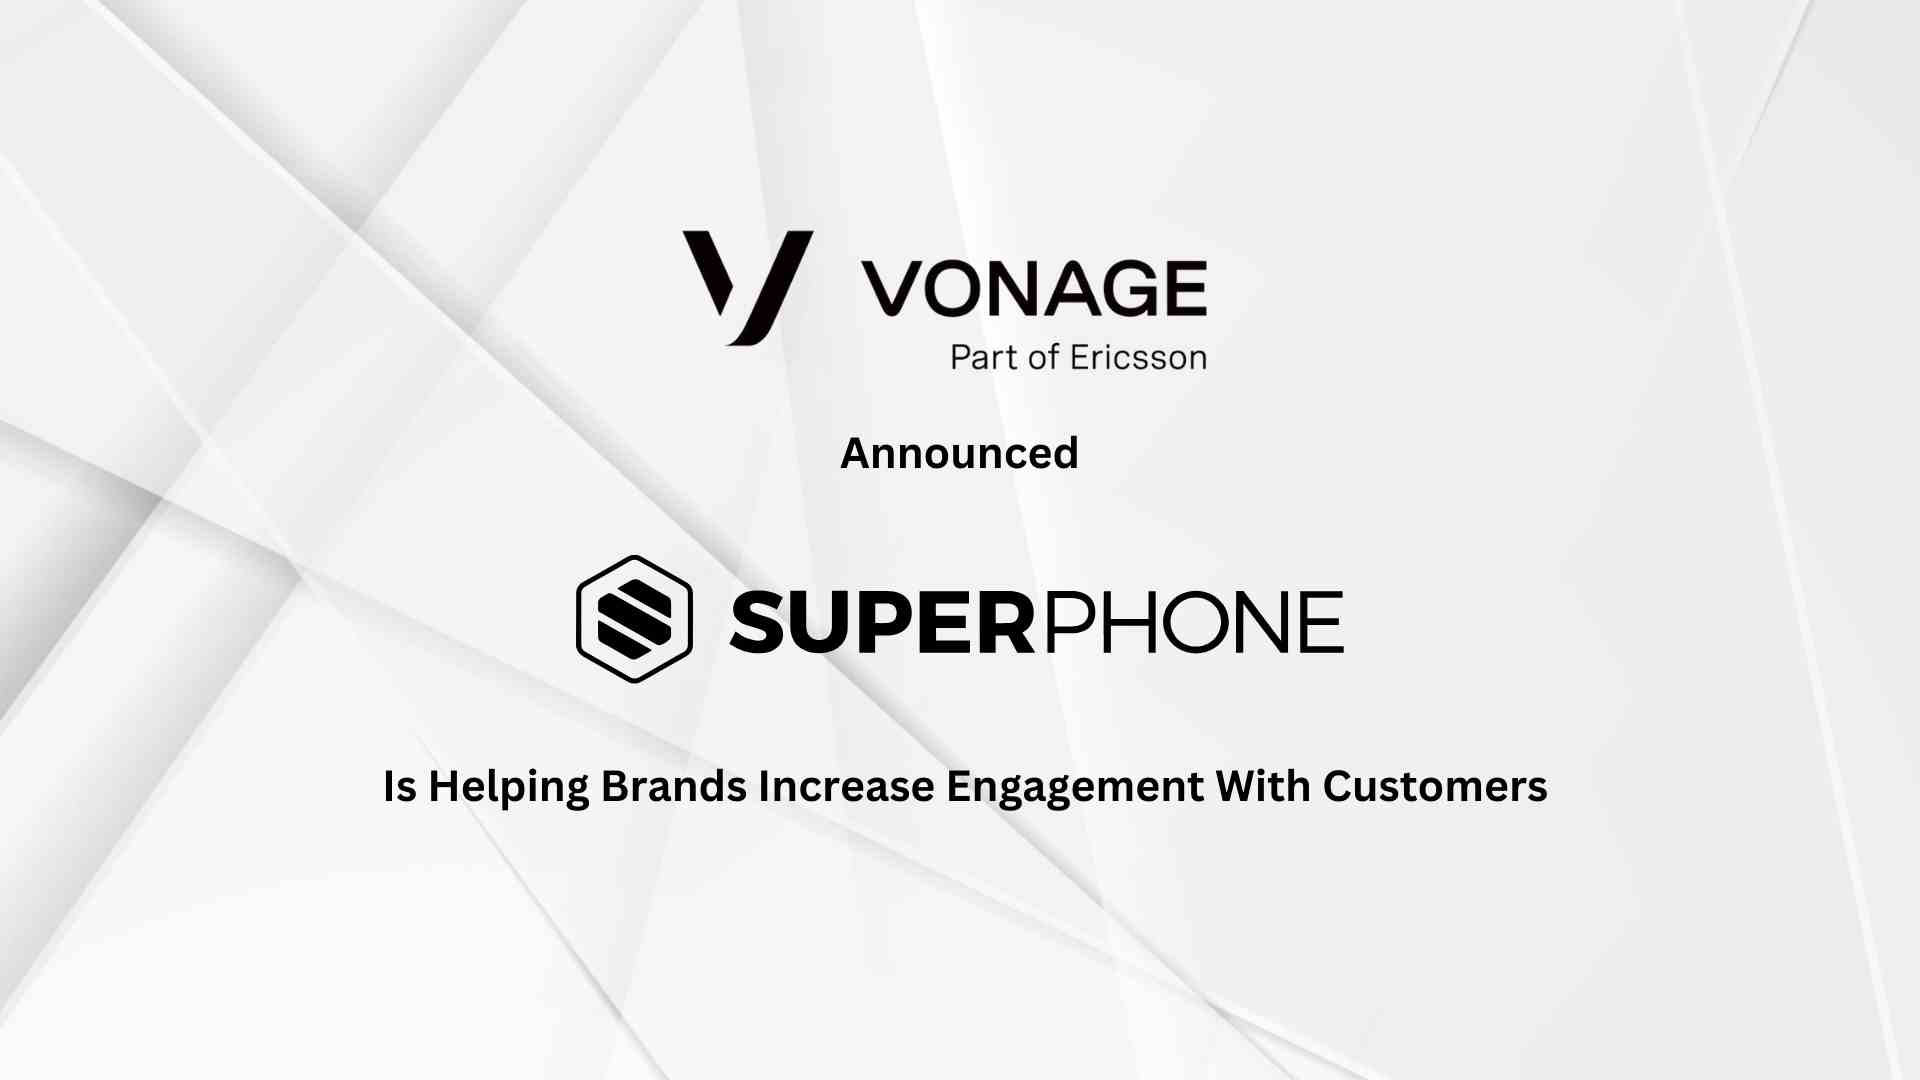 Marketing Platform SuperPhone® Helps Coaches, Creators, Brands & Retailers Increase Customer Engagement and Drive Revenue Powered by Vonage